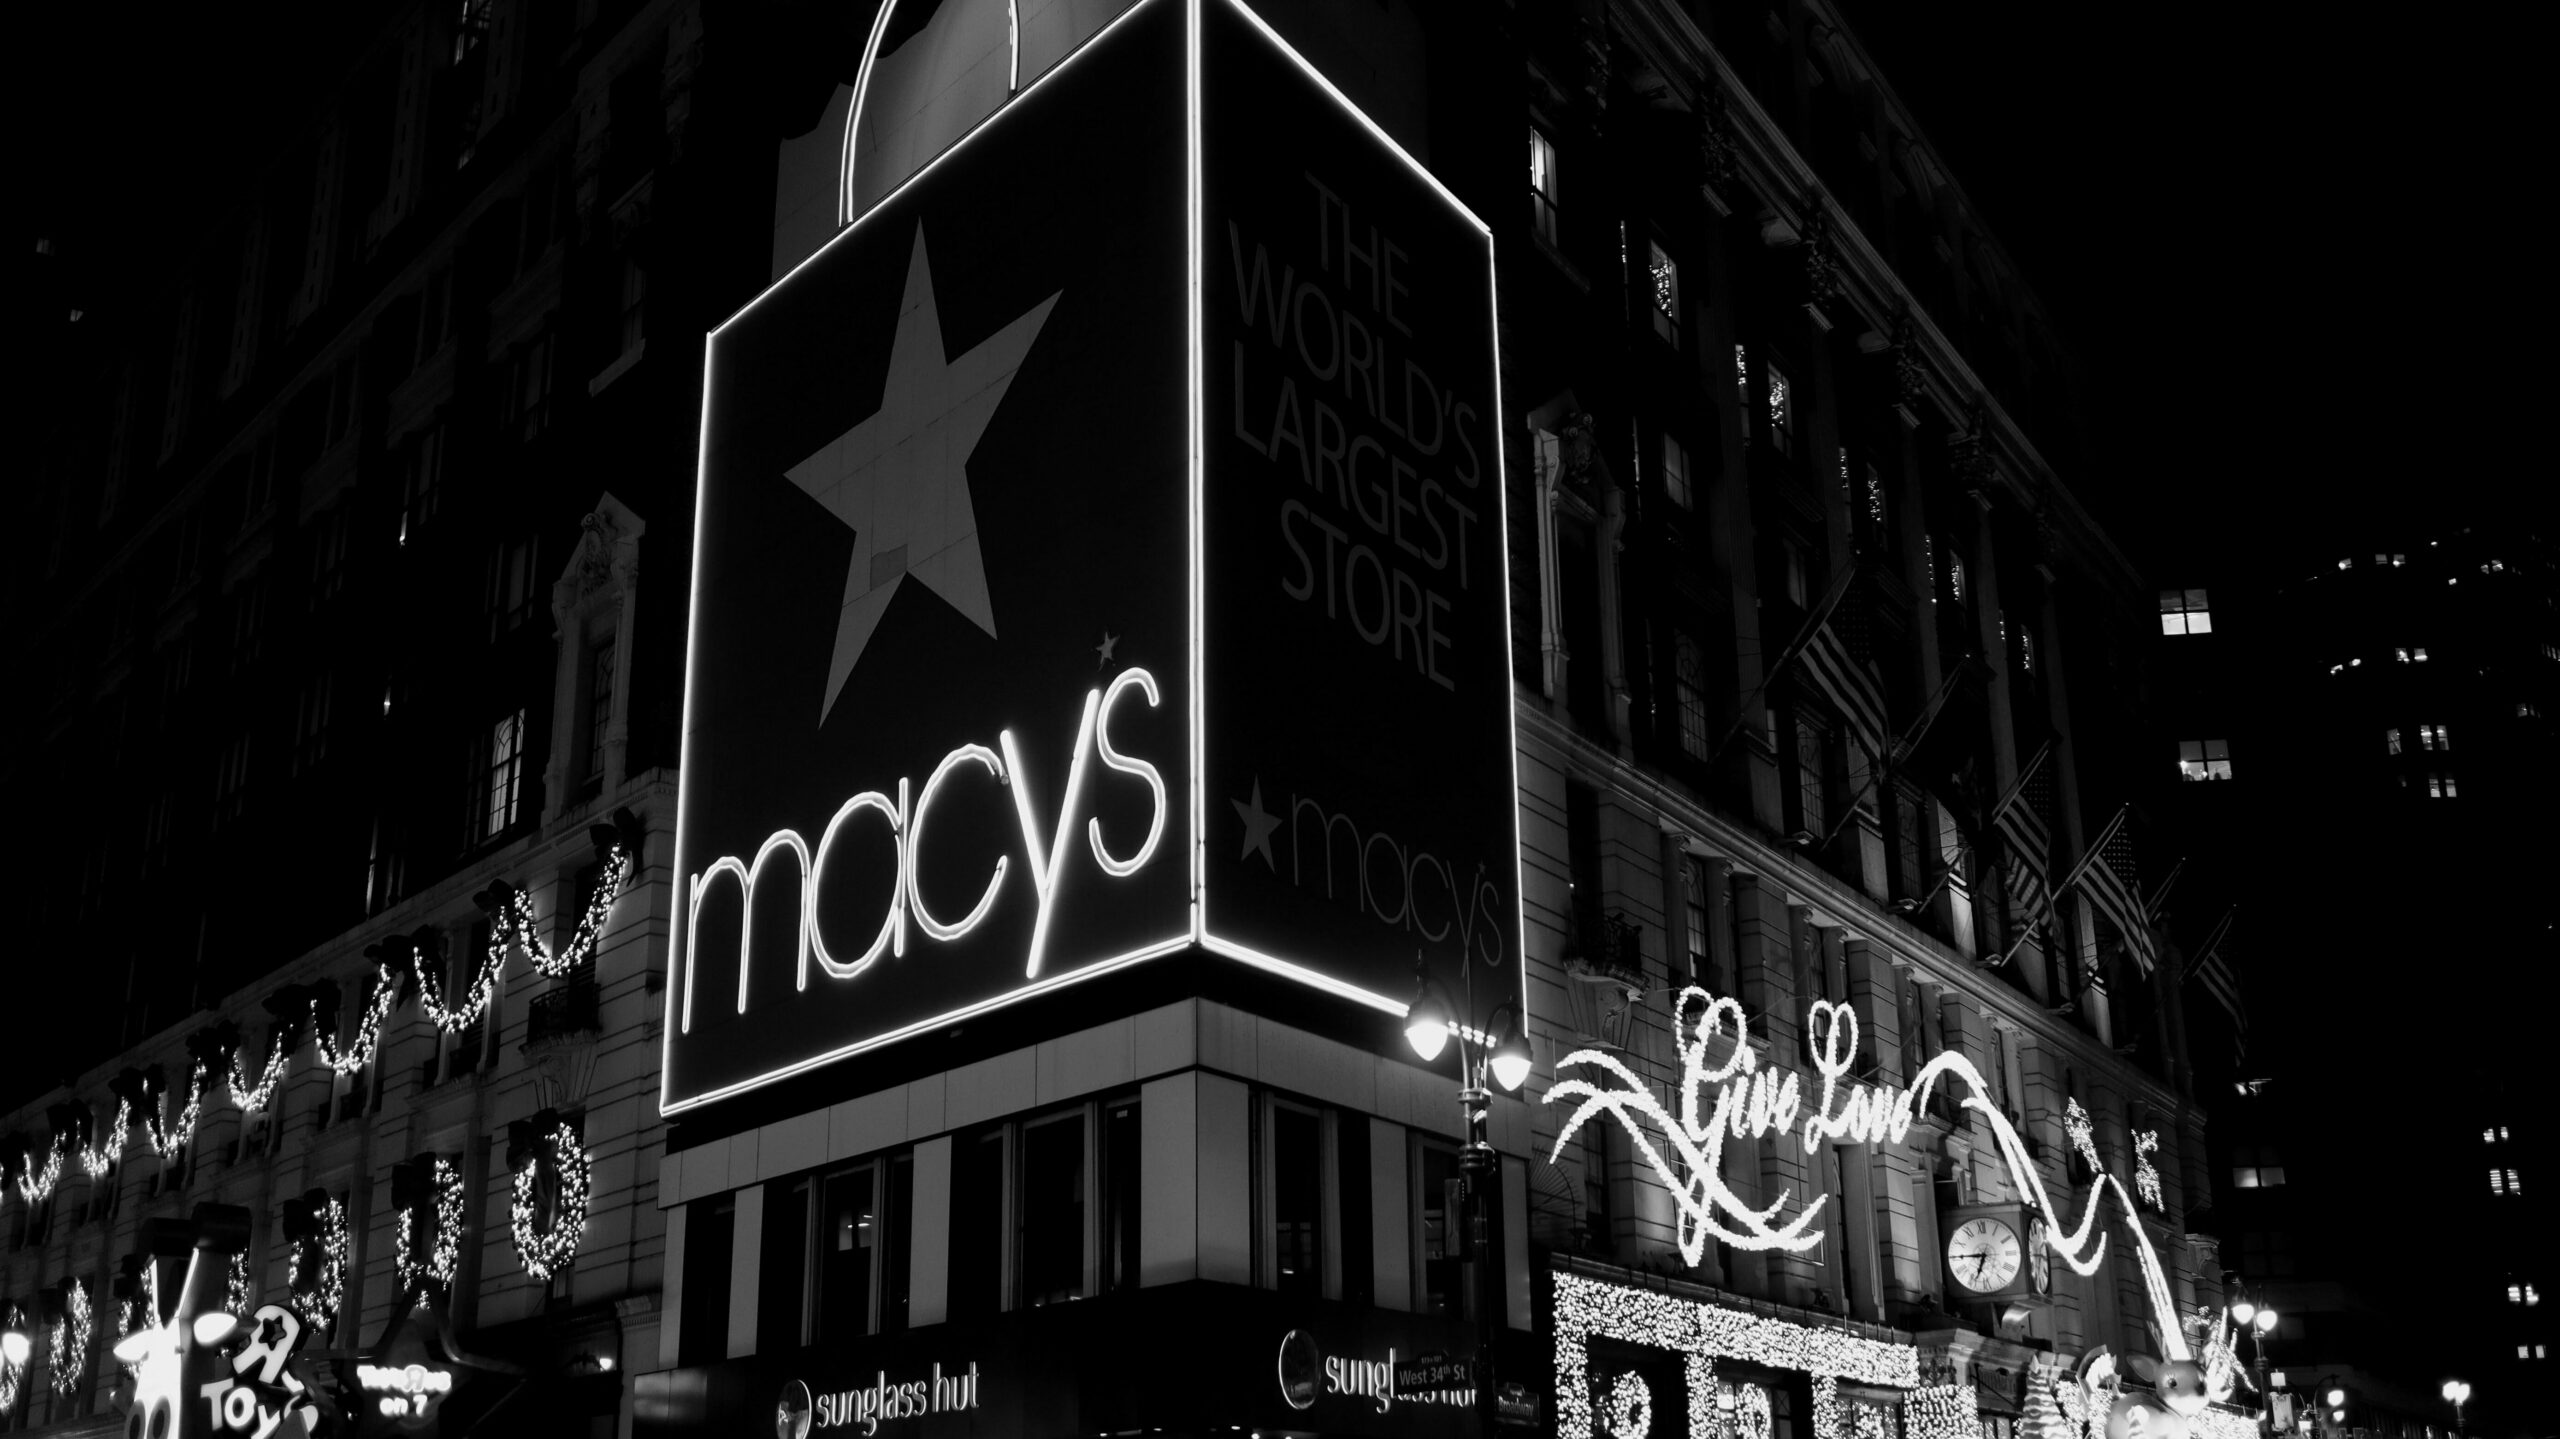 What time does Macys close open?